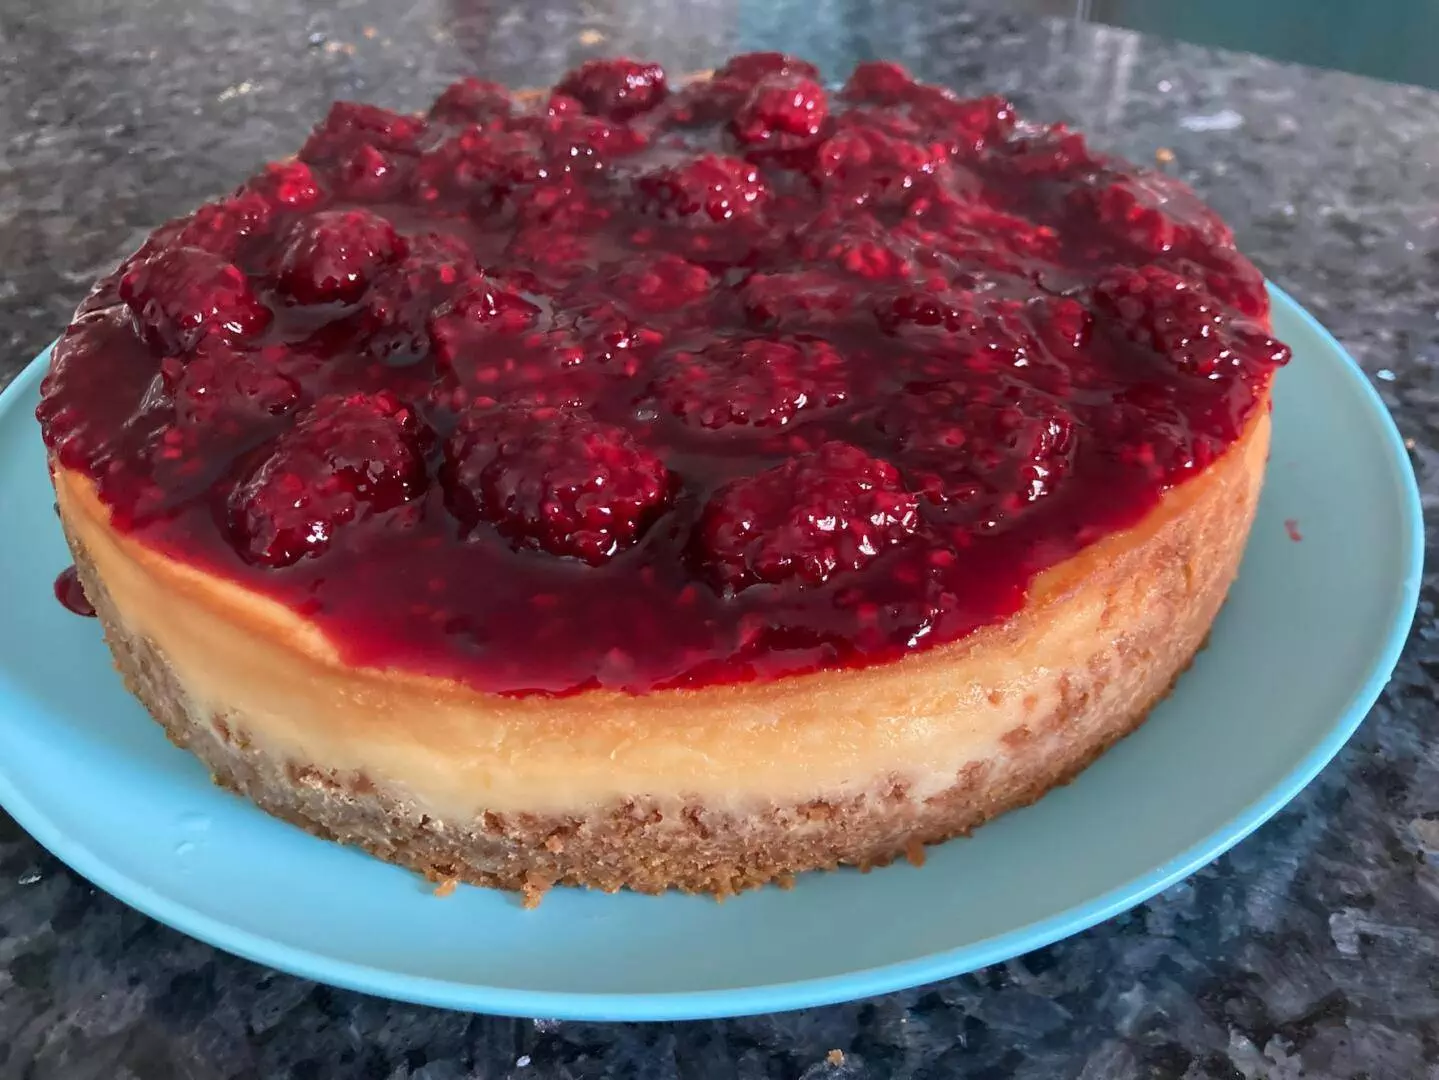 Classic Homemade Cheesecake Recipe from Out of the Box Baking.com